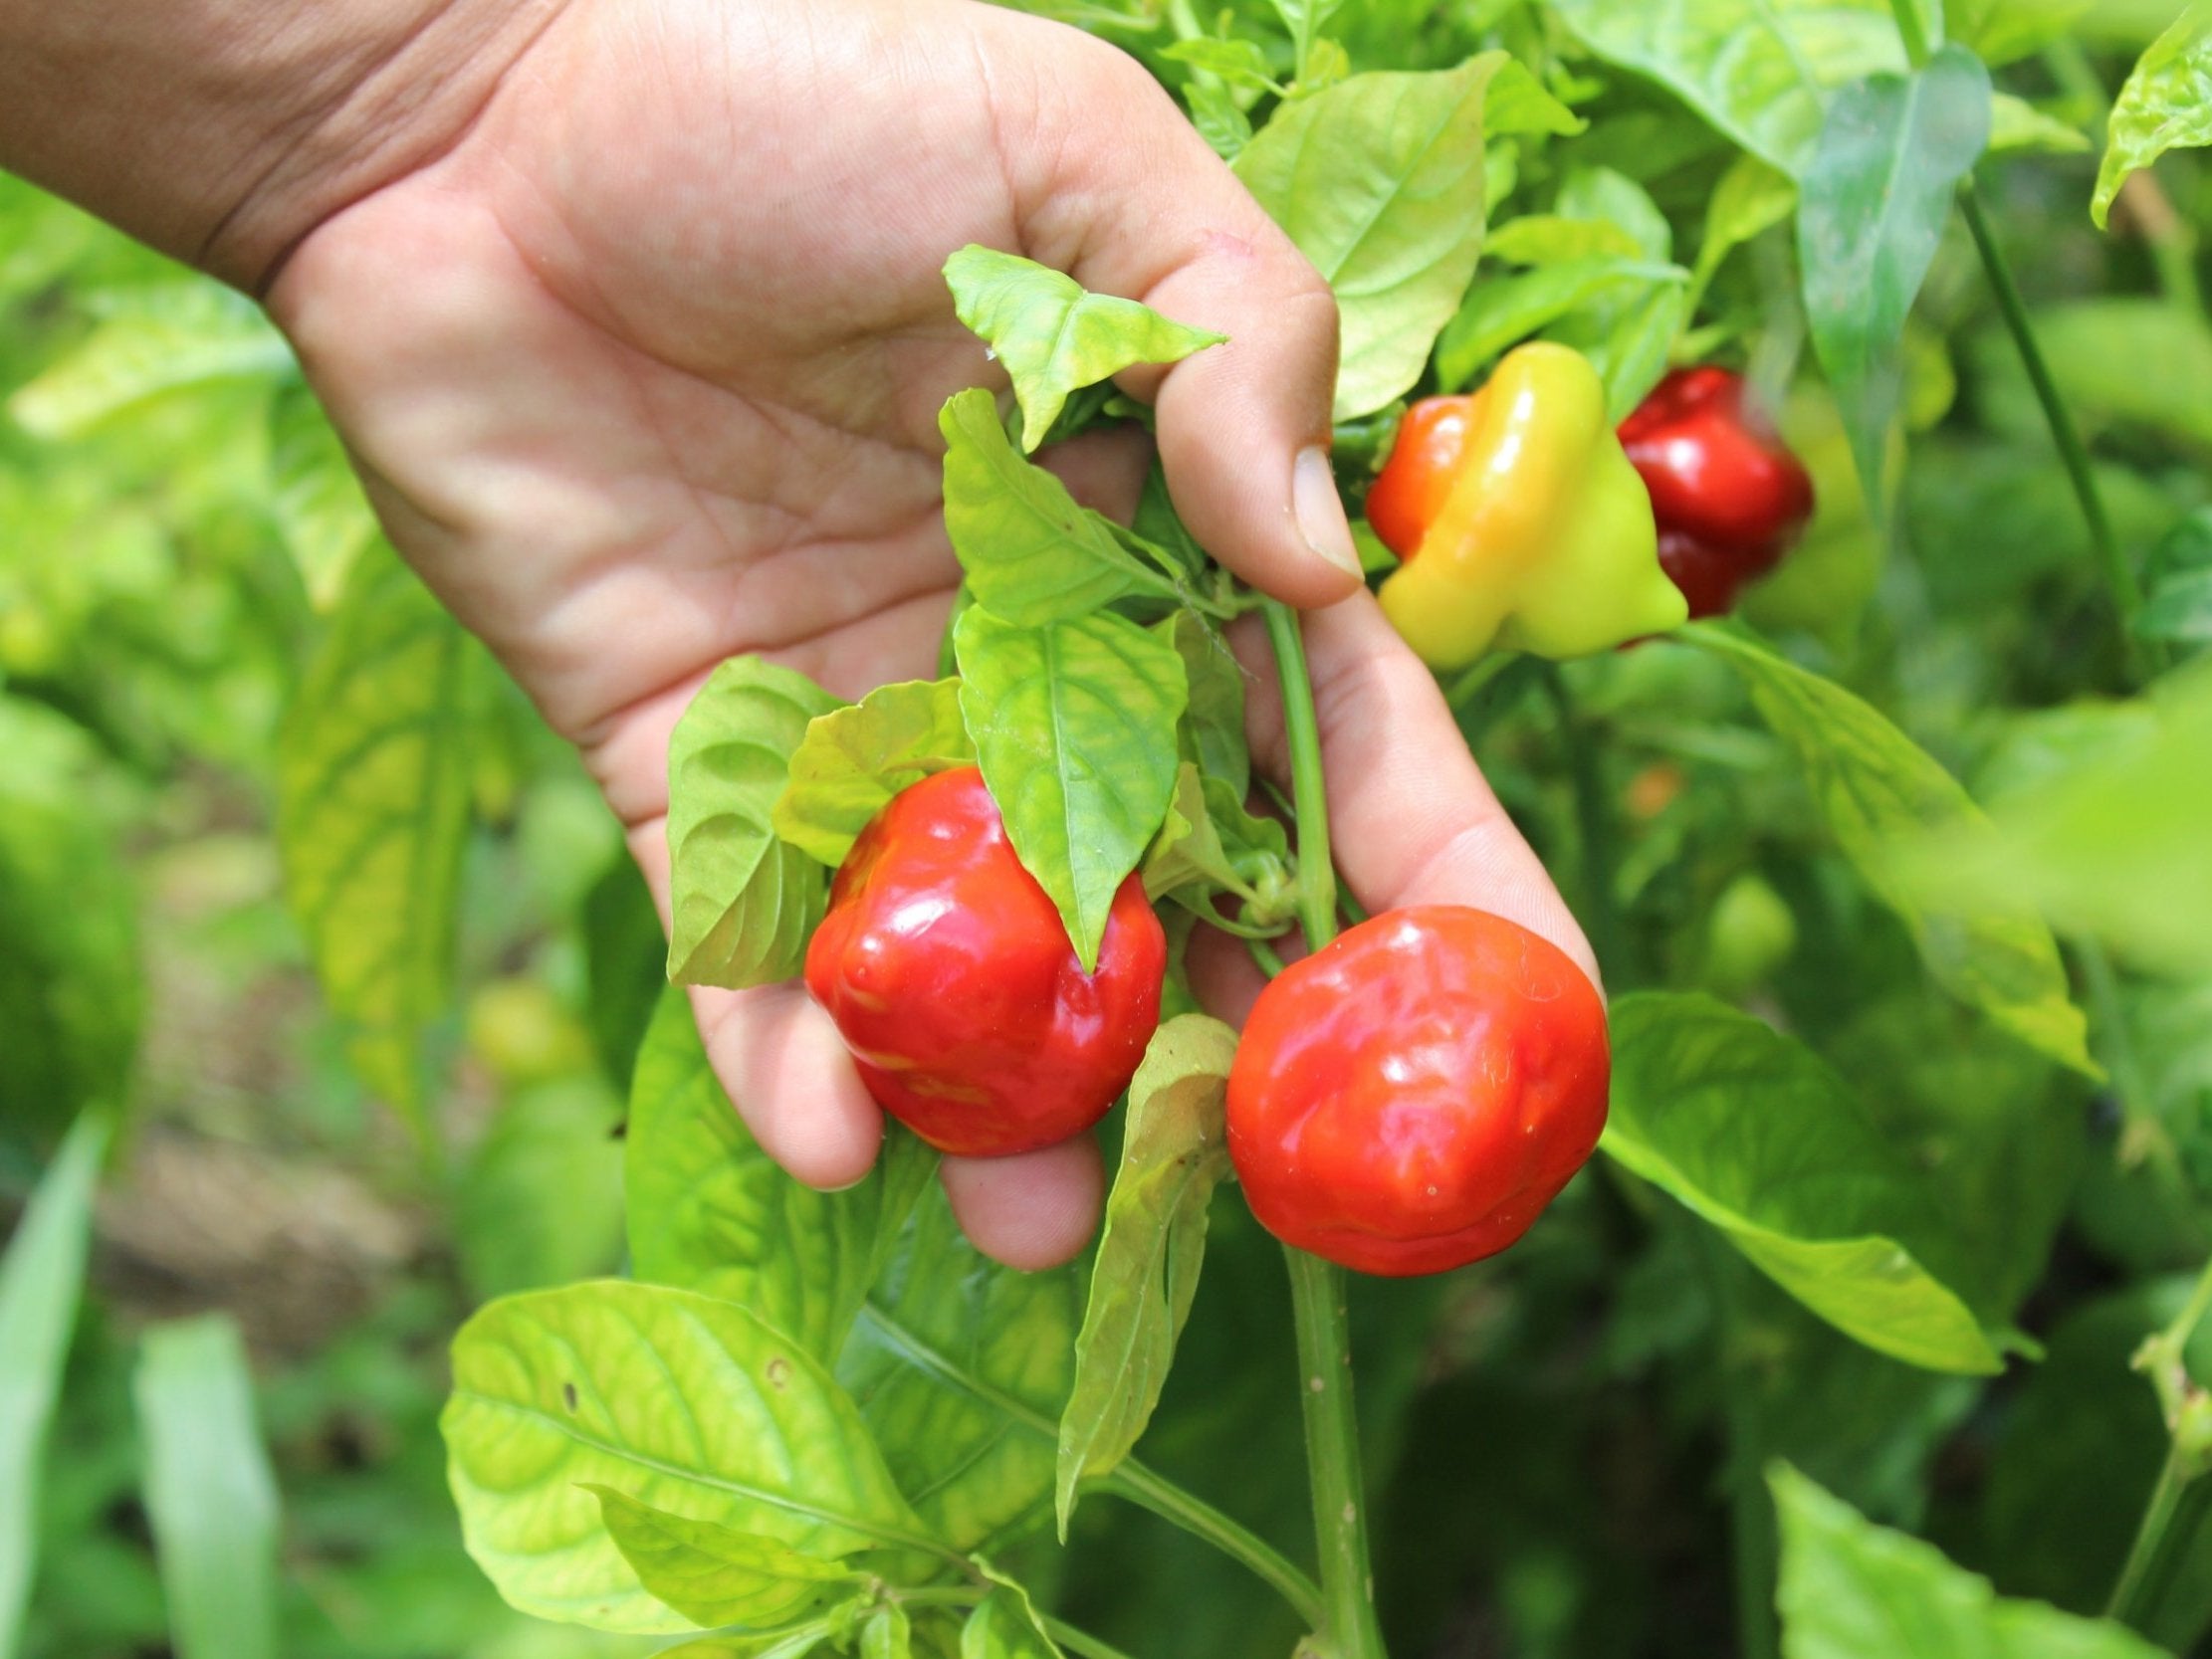 Bell peppers grow in a community farm that supplies a self-managed kitchen